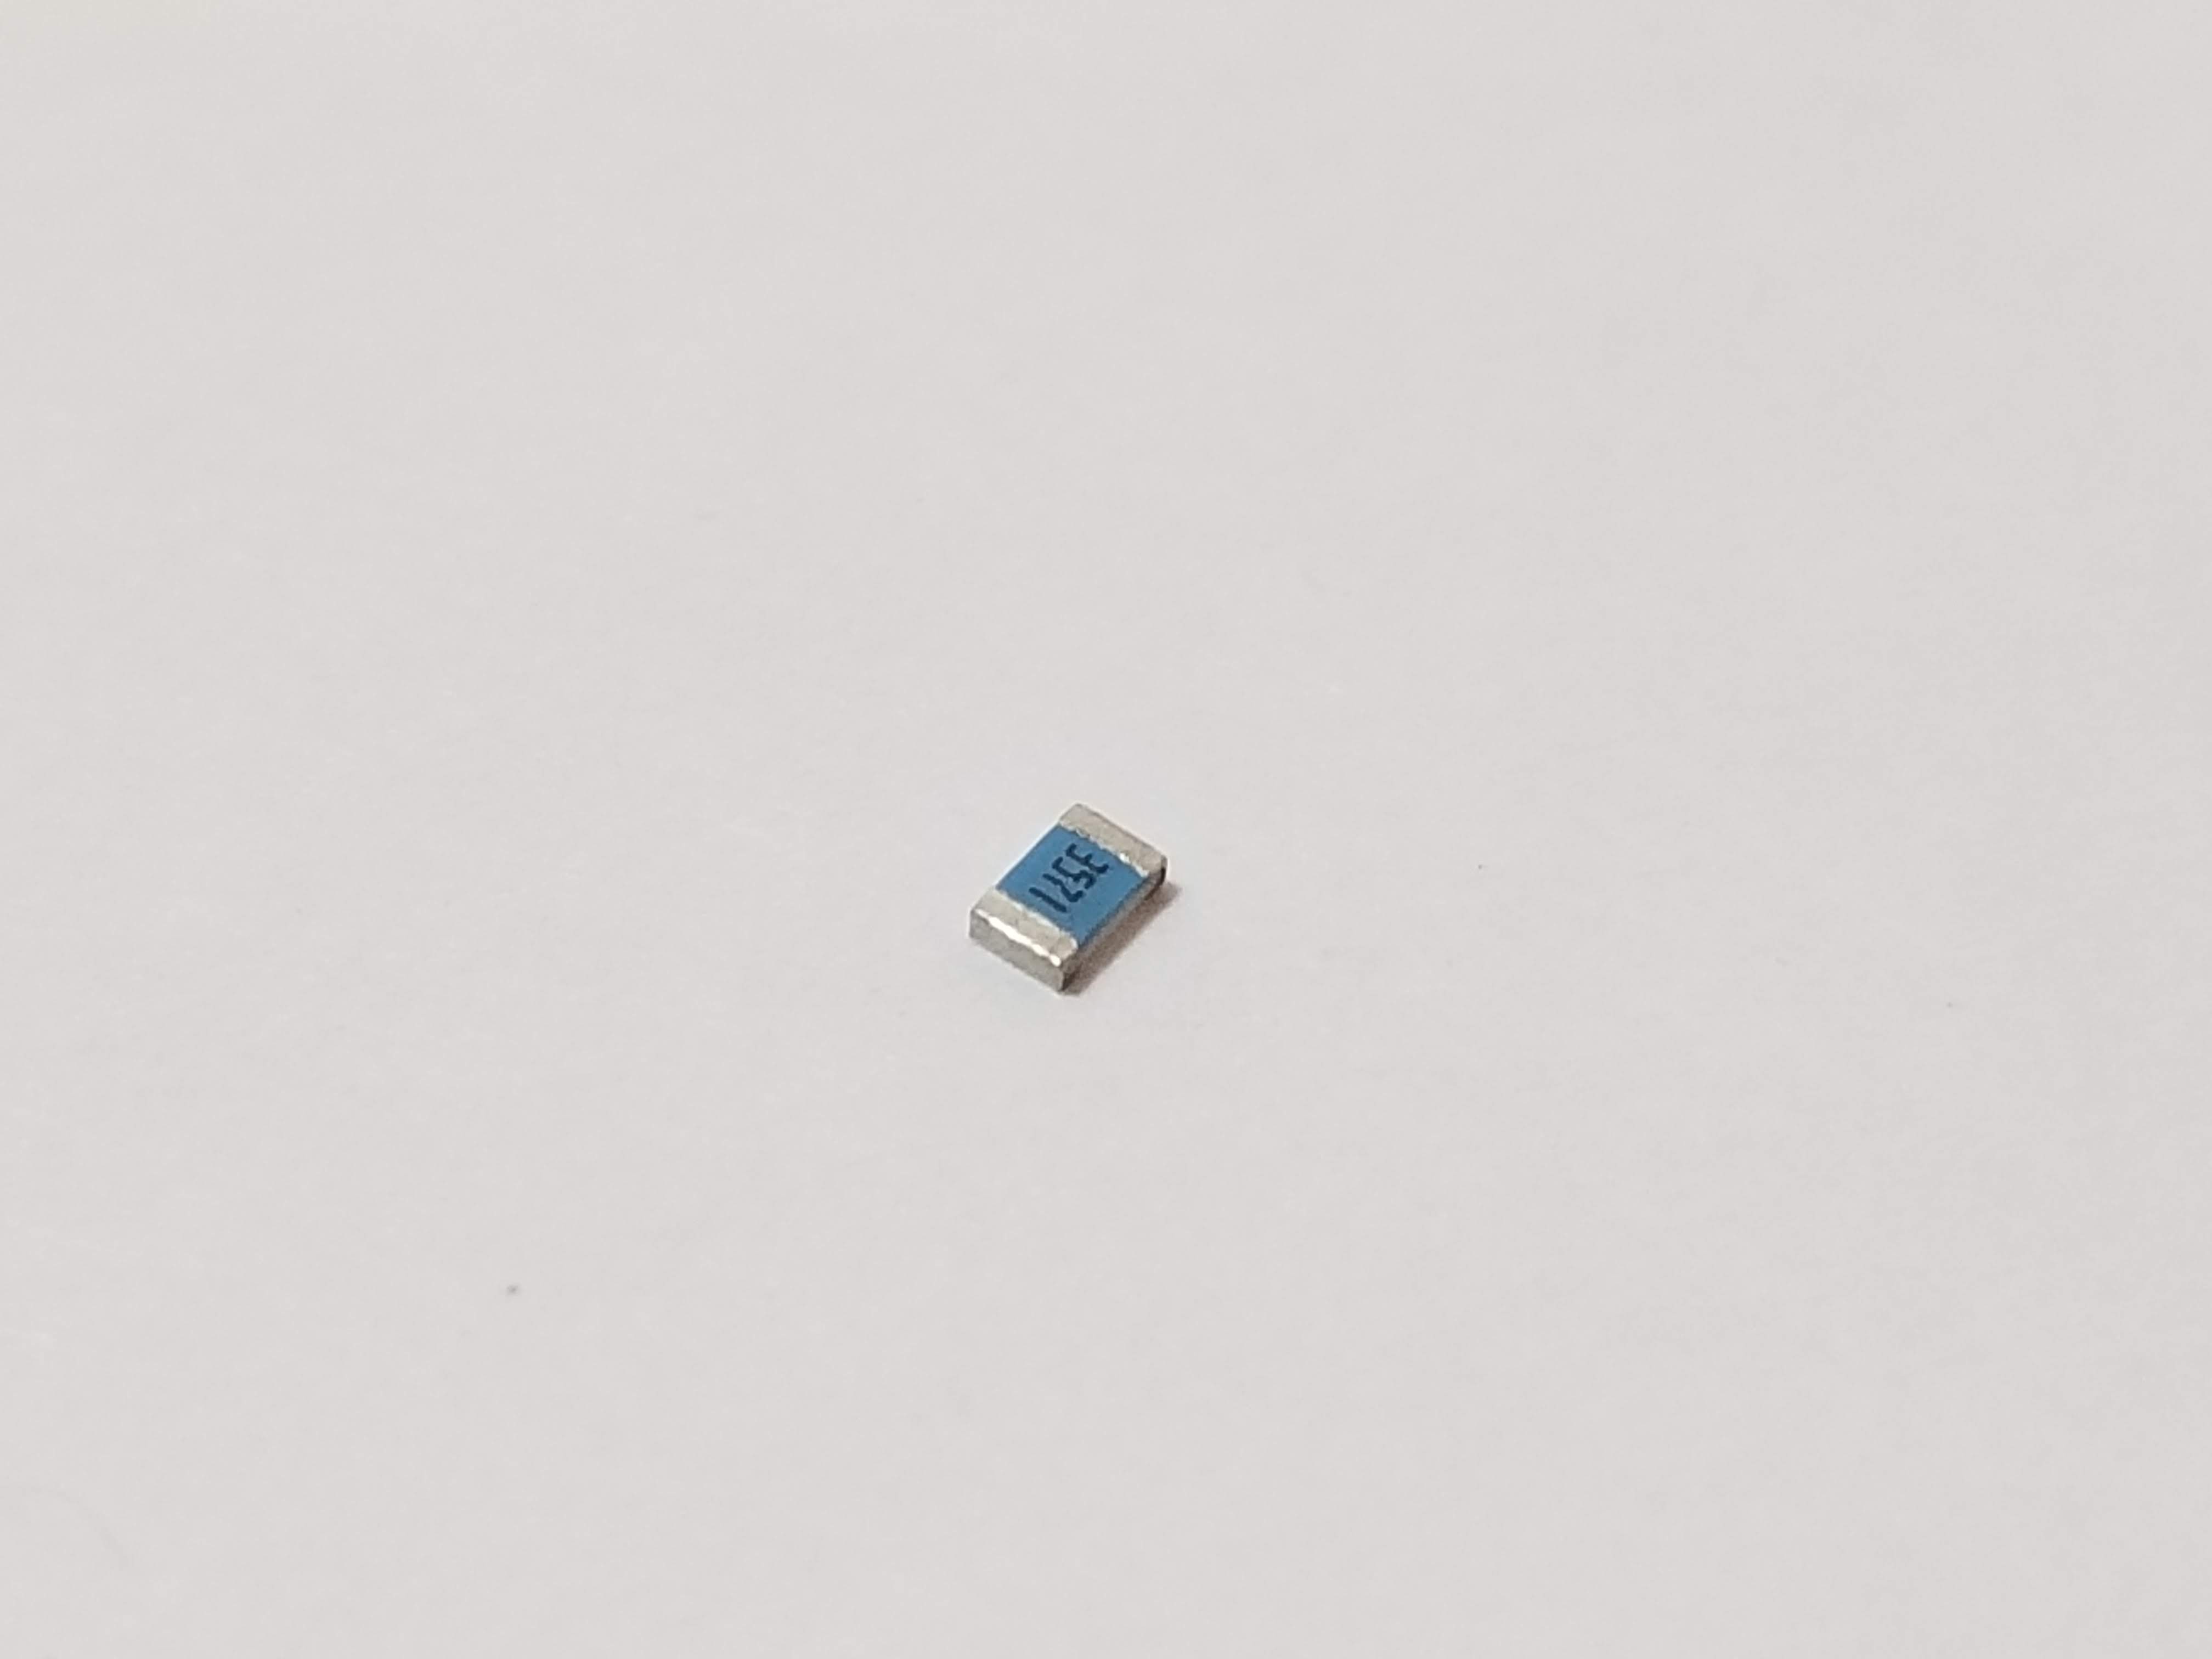 Picture of 24.9k Ohm Resistor 1% 0805